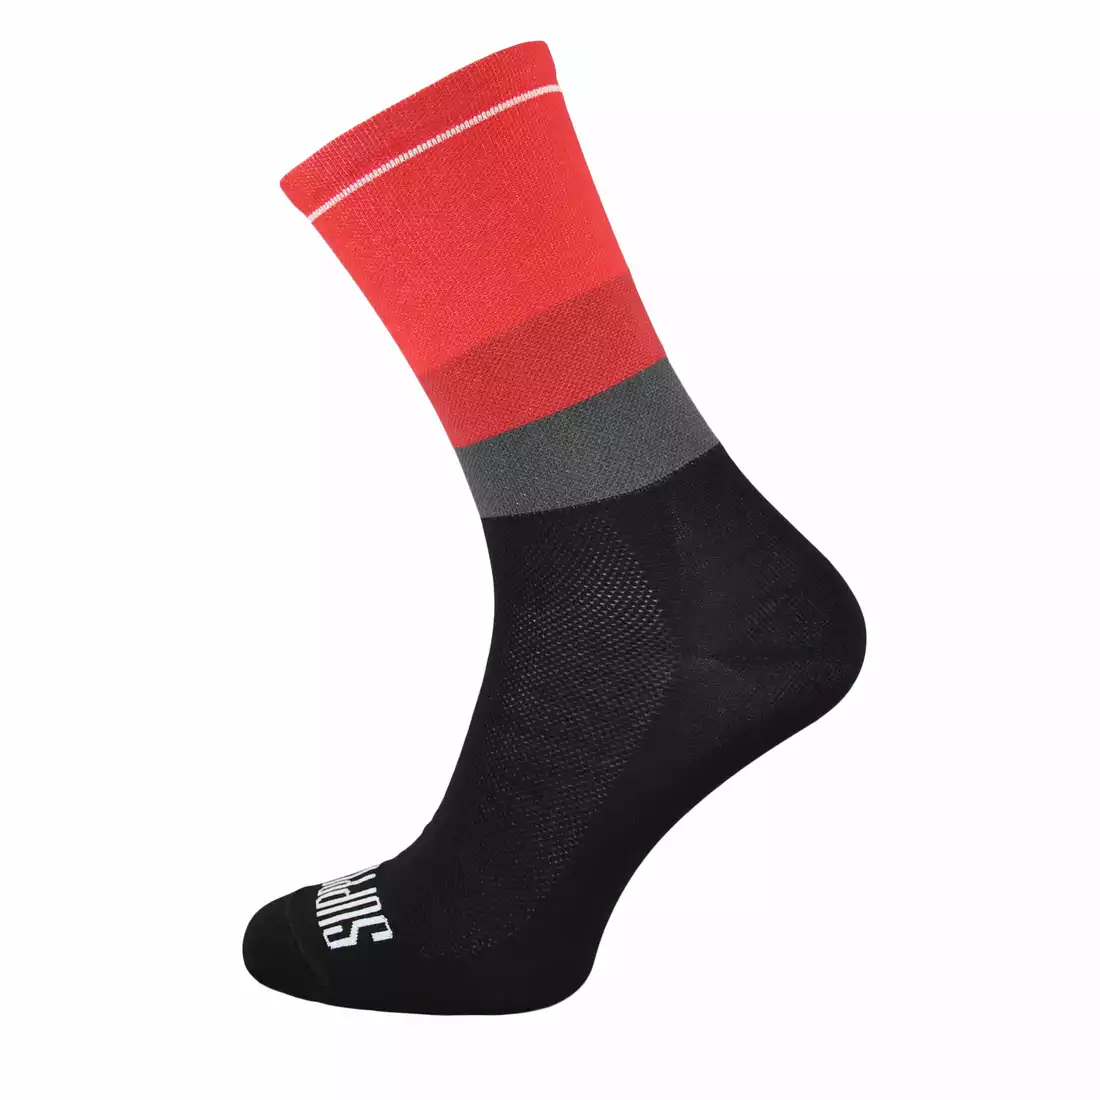 SUPPORTSPORT cycling socks TONE'S RED